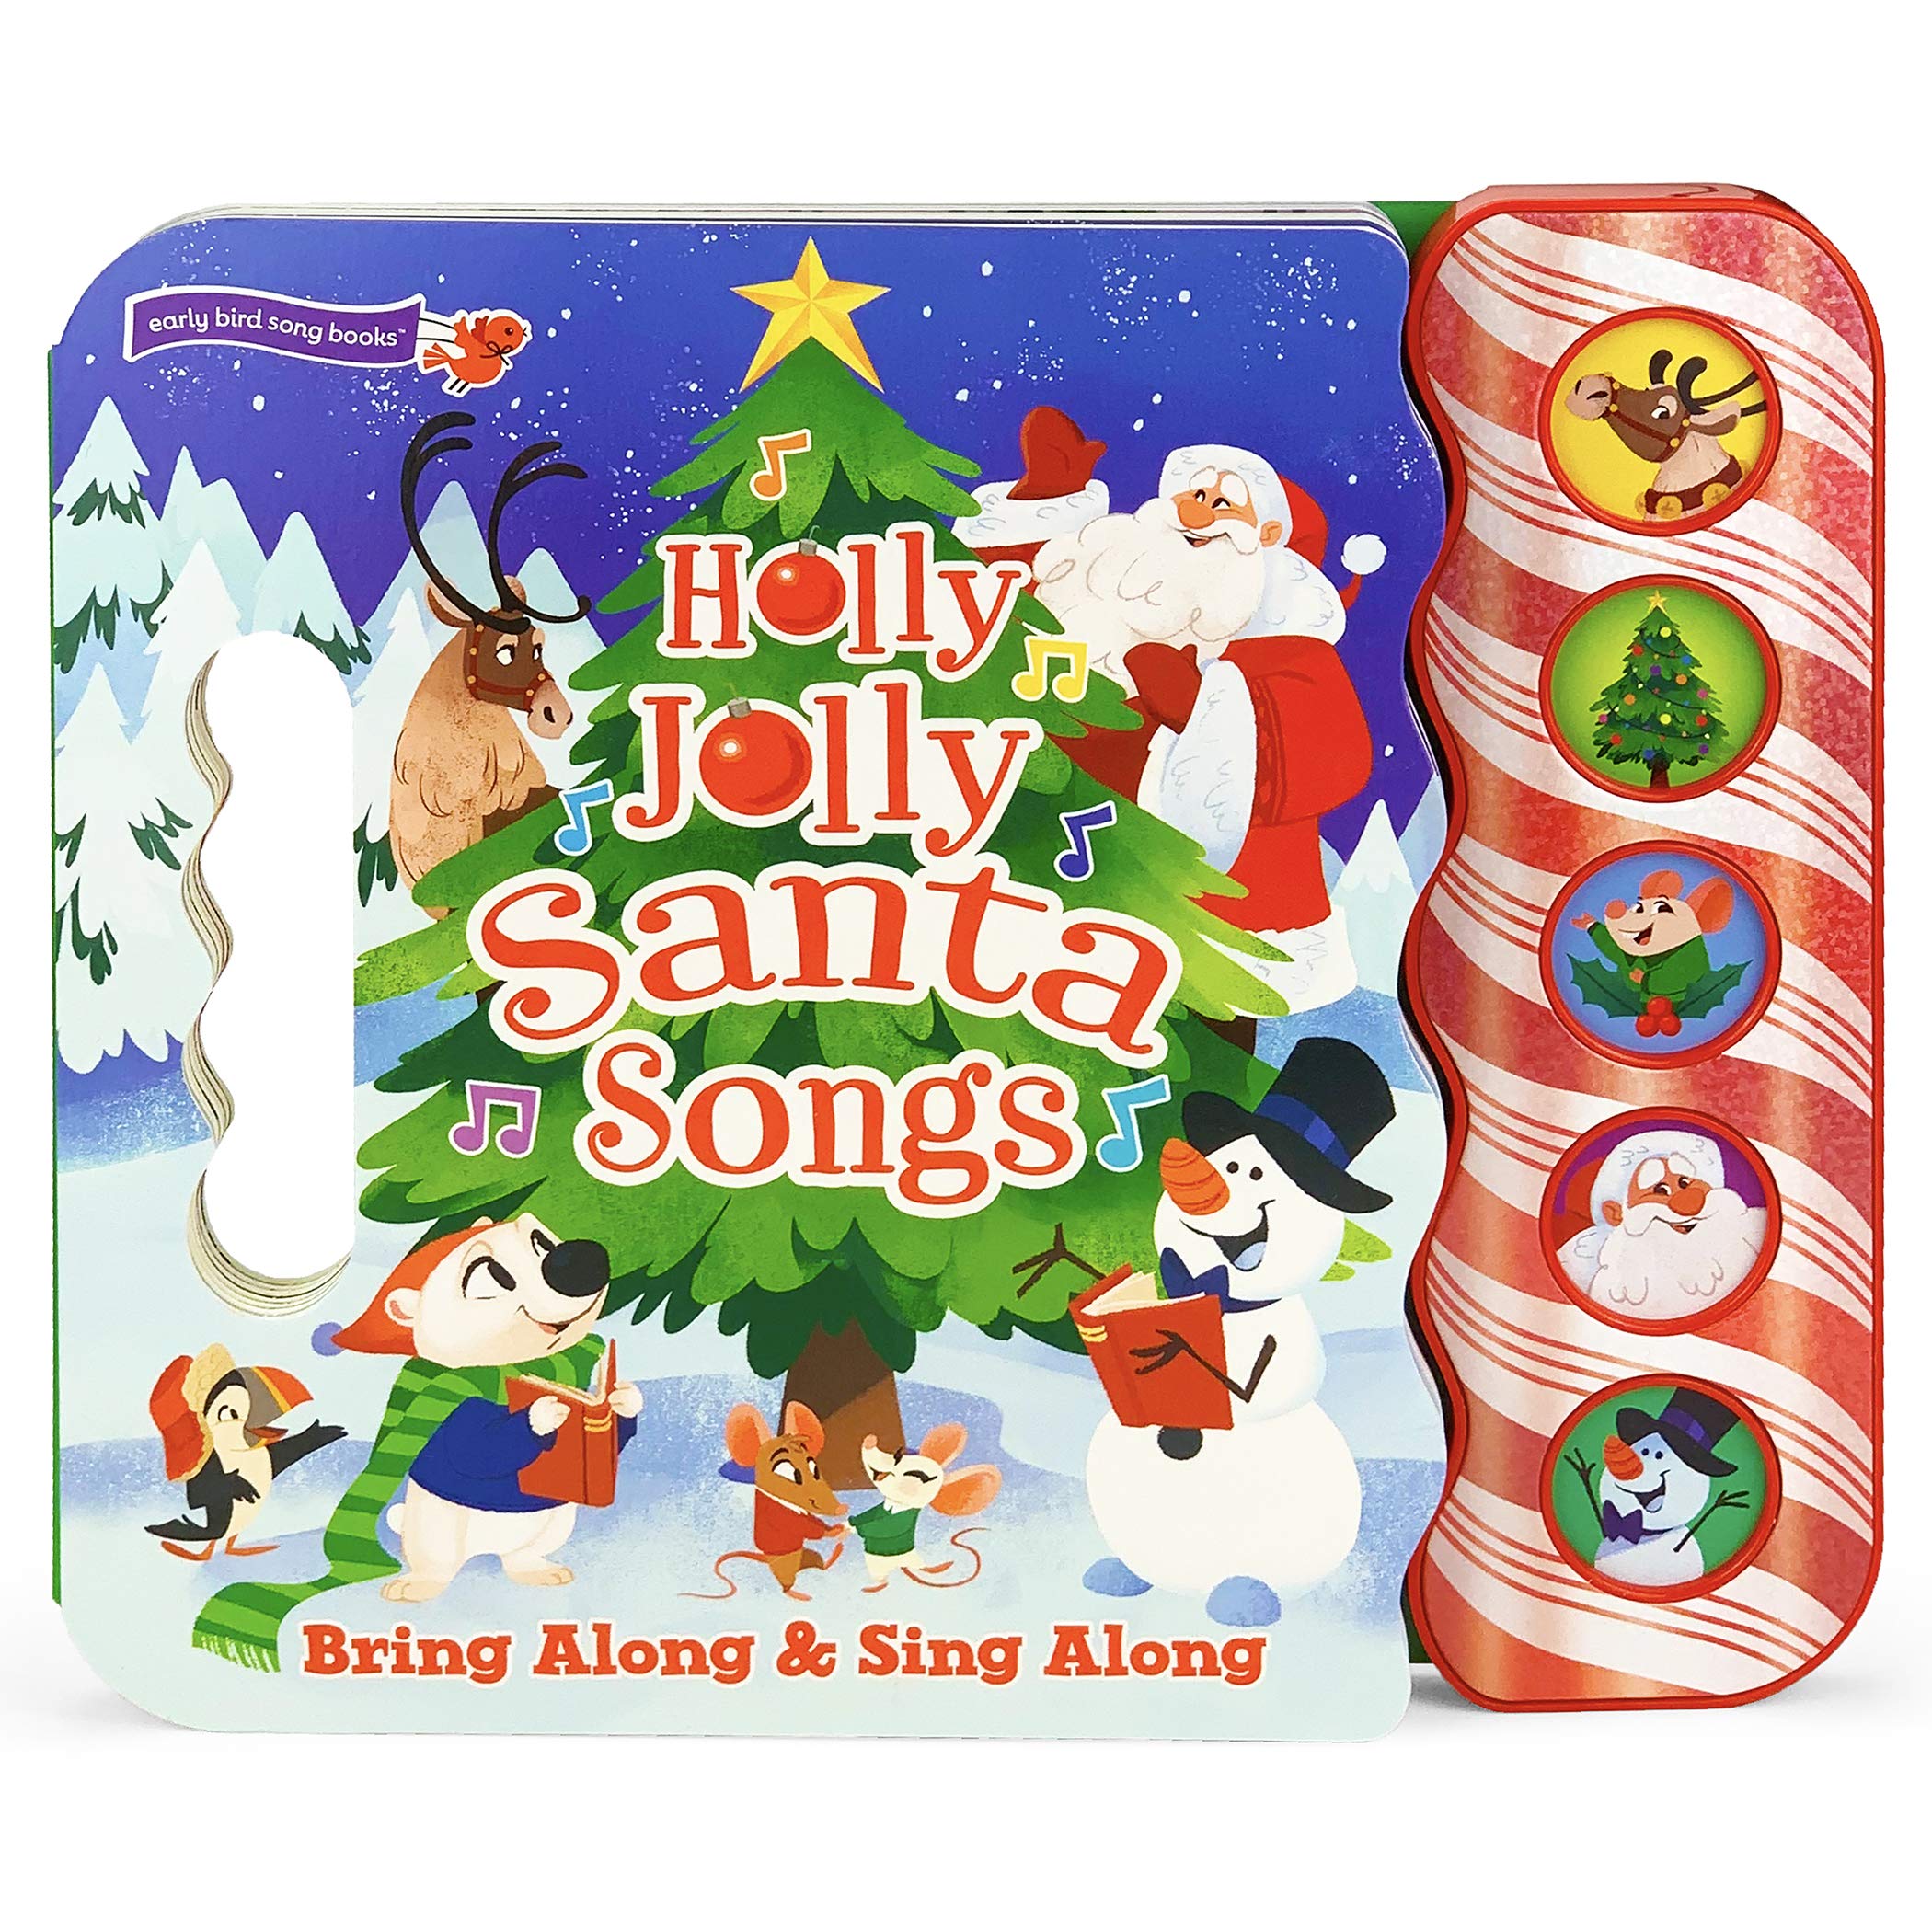 Holly Jolly Santa Songs - Children's Christmas Book with Fun and Festive Sounds for Kids 2-5 (Early Bird Song Book)